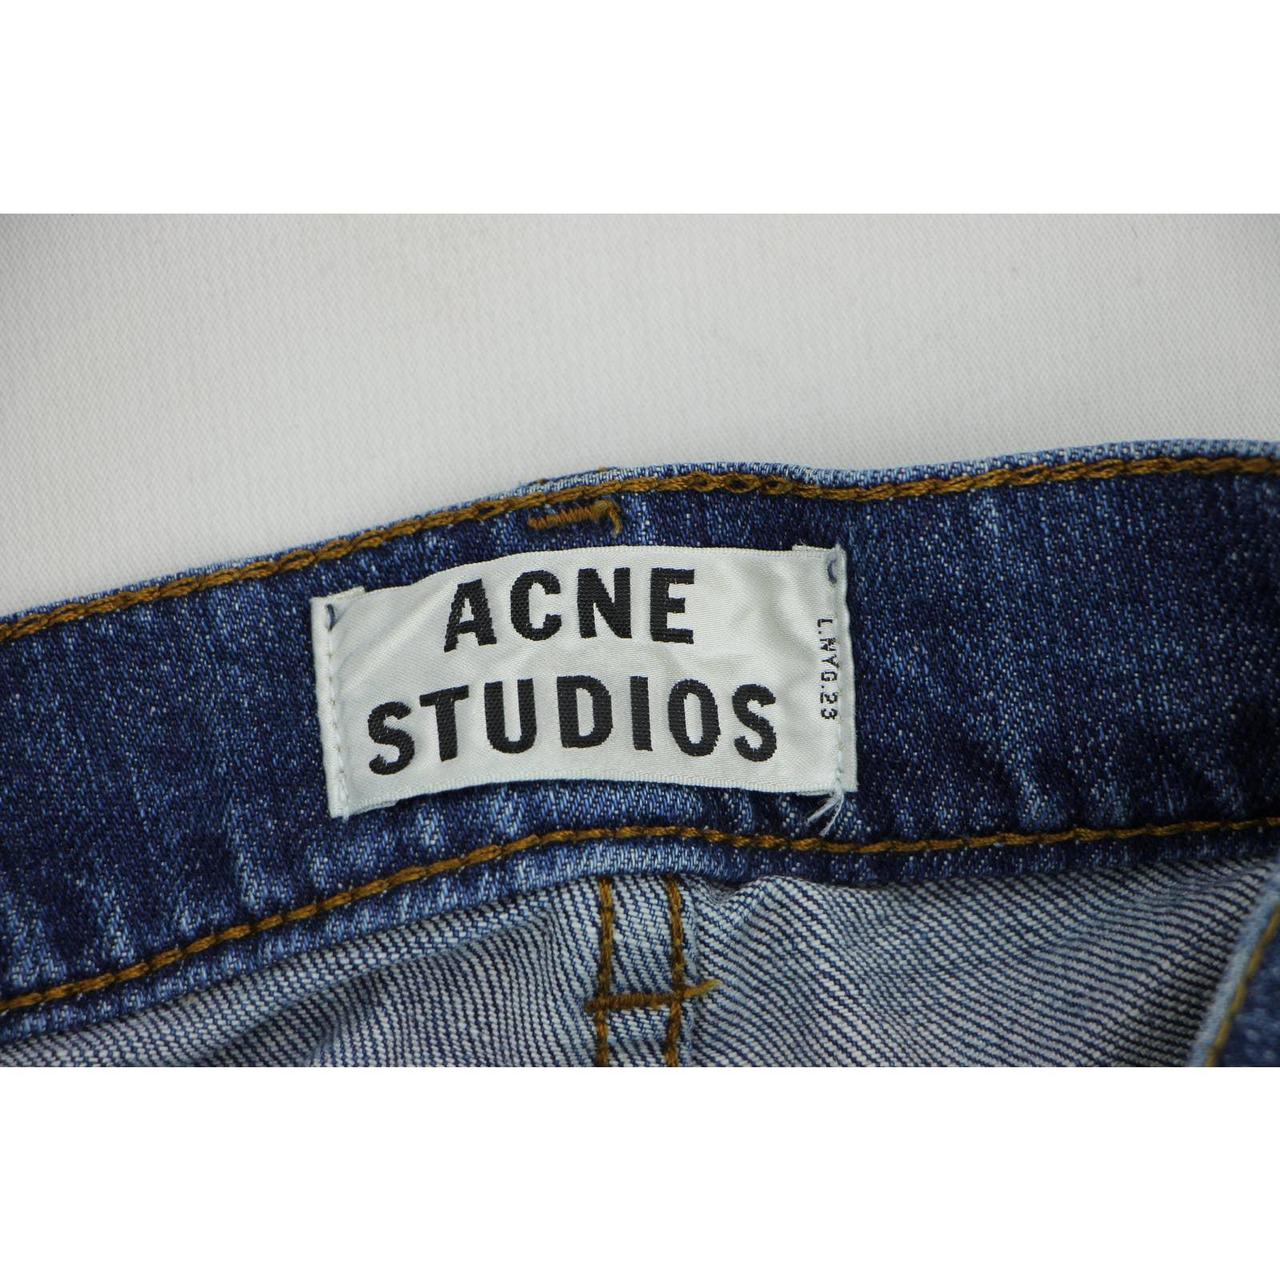 Product Image 3 - Acne Studios Ace Stretch Jeans